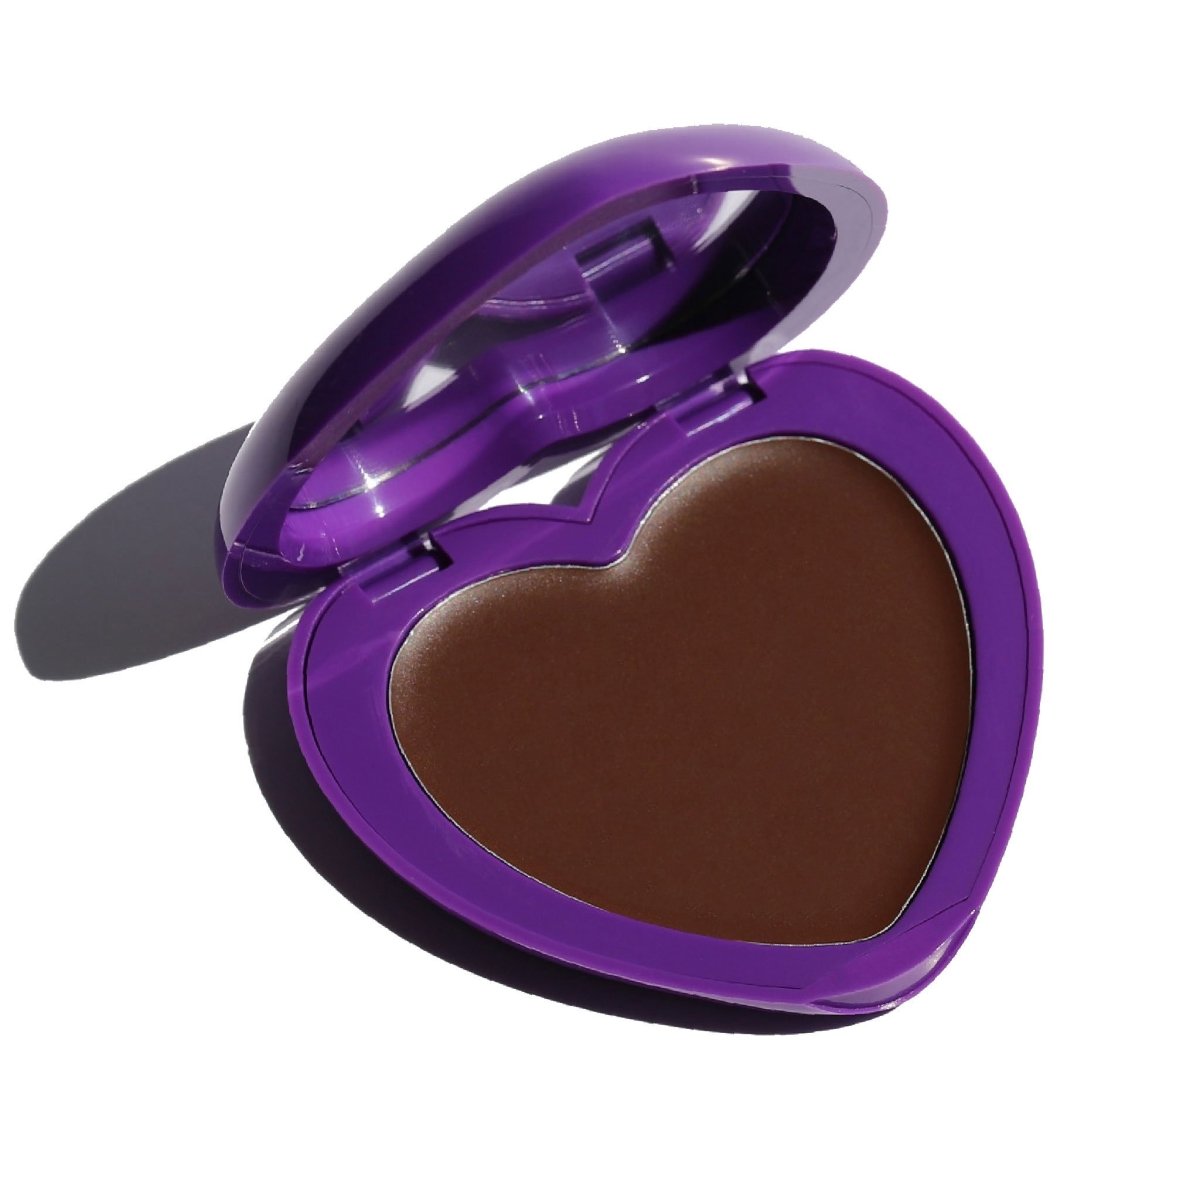 purple heart-shaped compact with mirror and brown pan - candy paint bronzer, cinnamon roll - half caked makeup